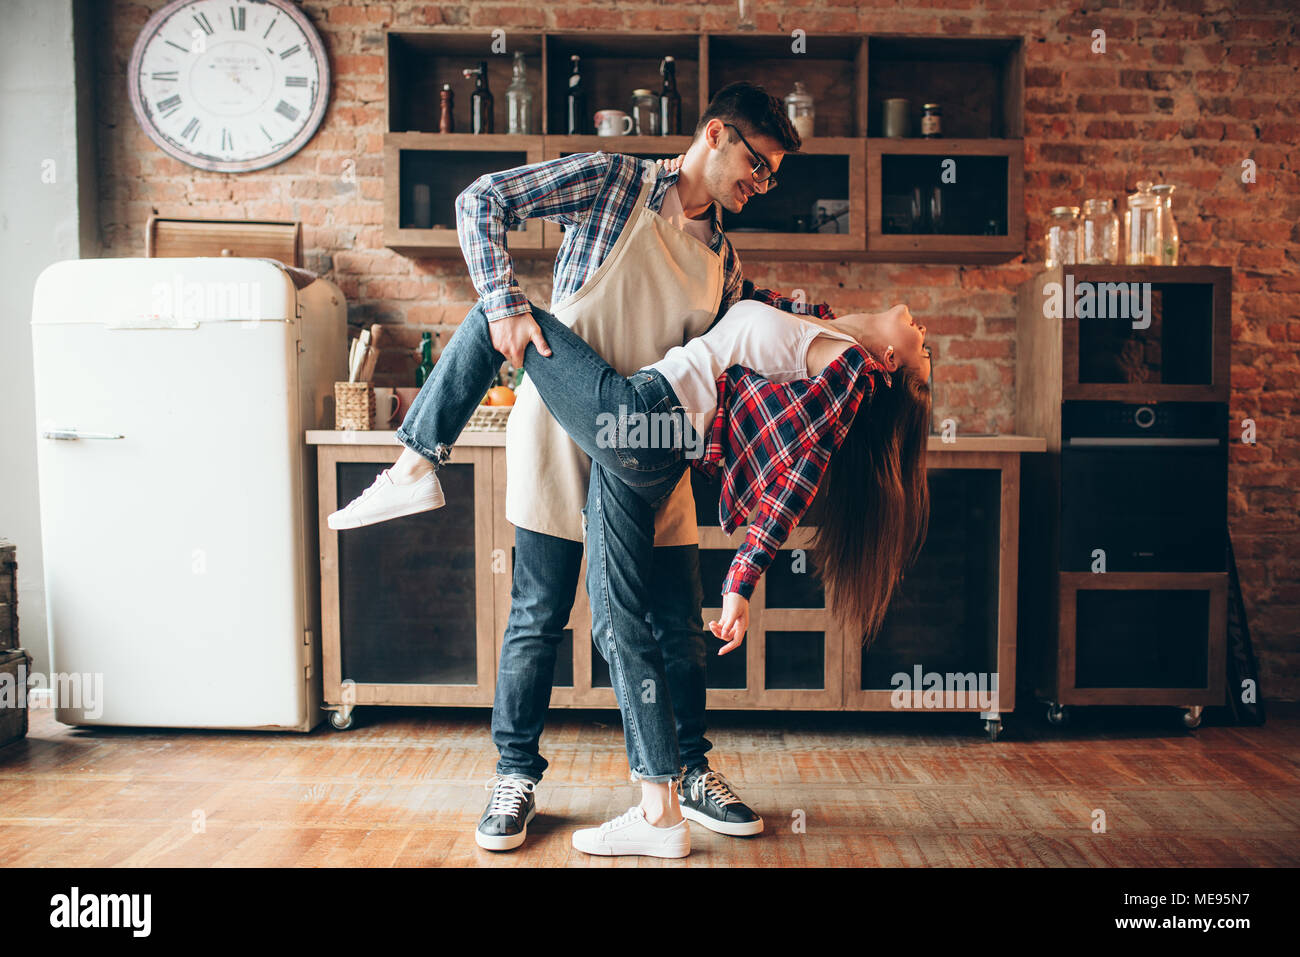 Funny Wedding Couple Poses Outside Before Stock Photo 627085277 |  Shutterstock